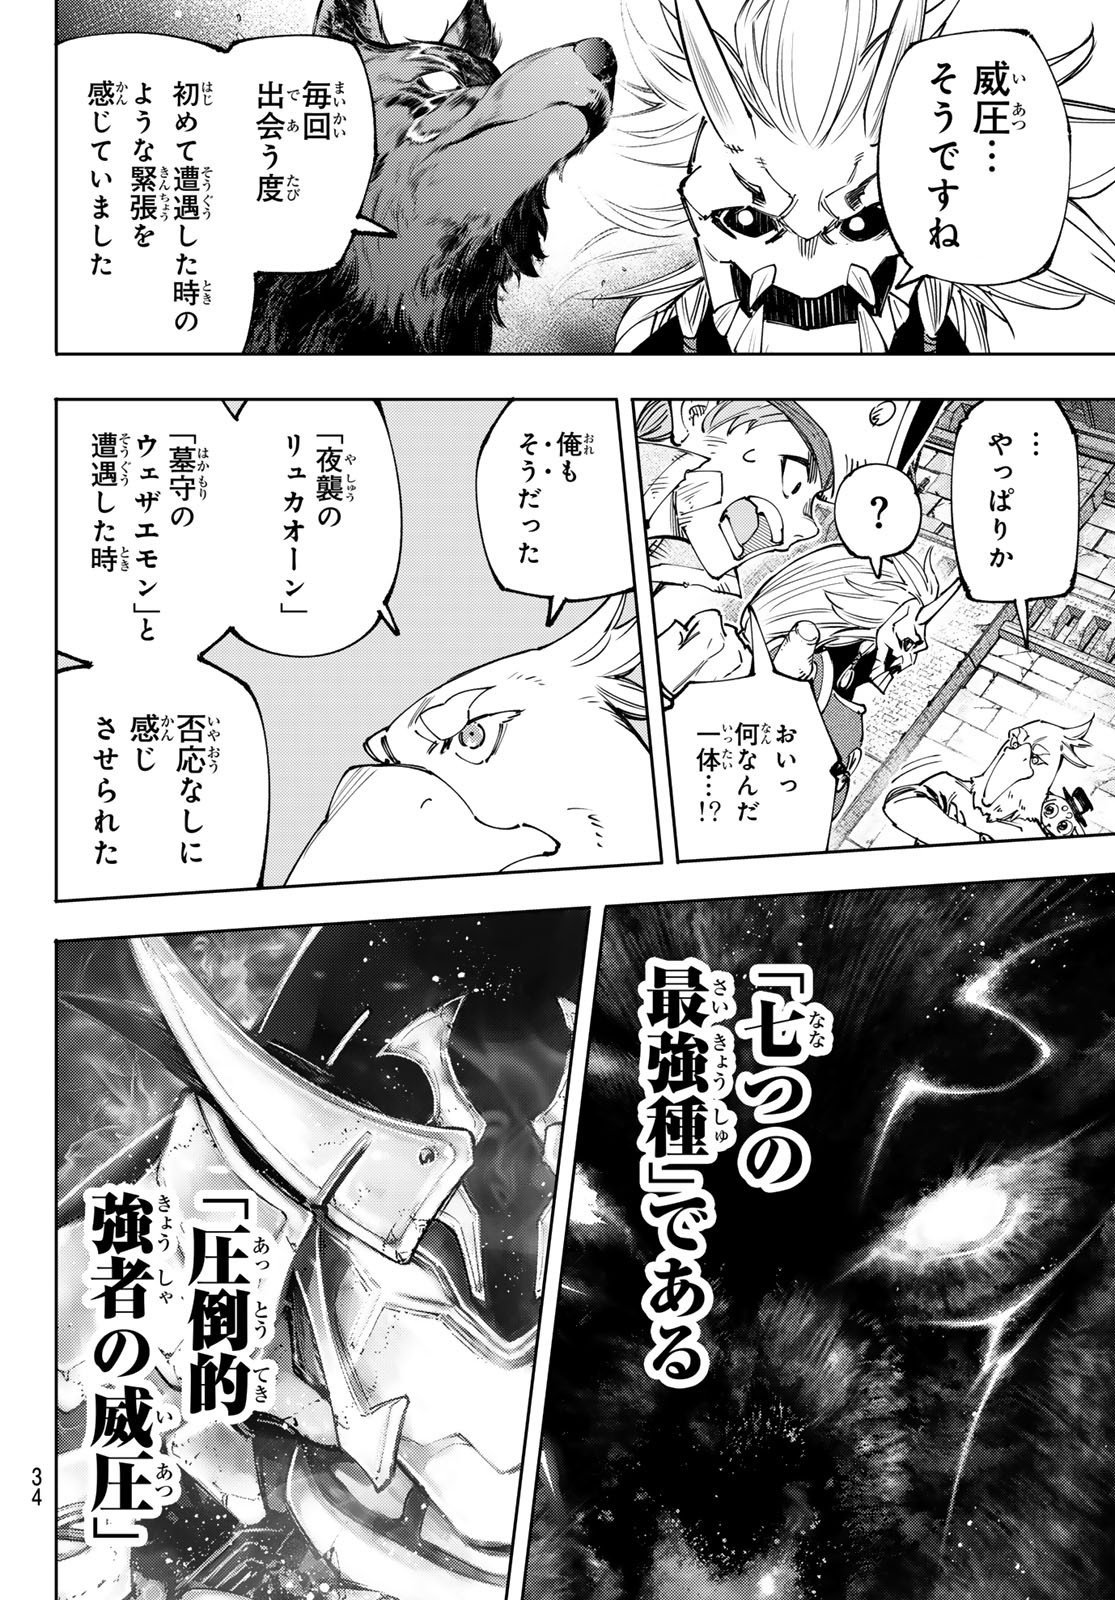 Weekly Shōnen Magazine - 週刊少年マガジン - Chapter 2024-24 - Page 34